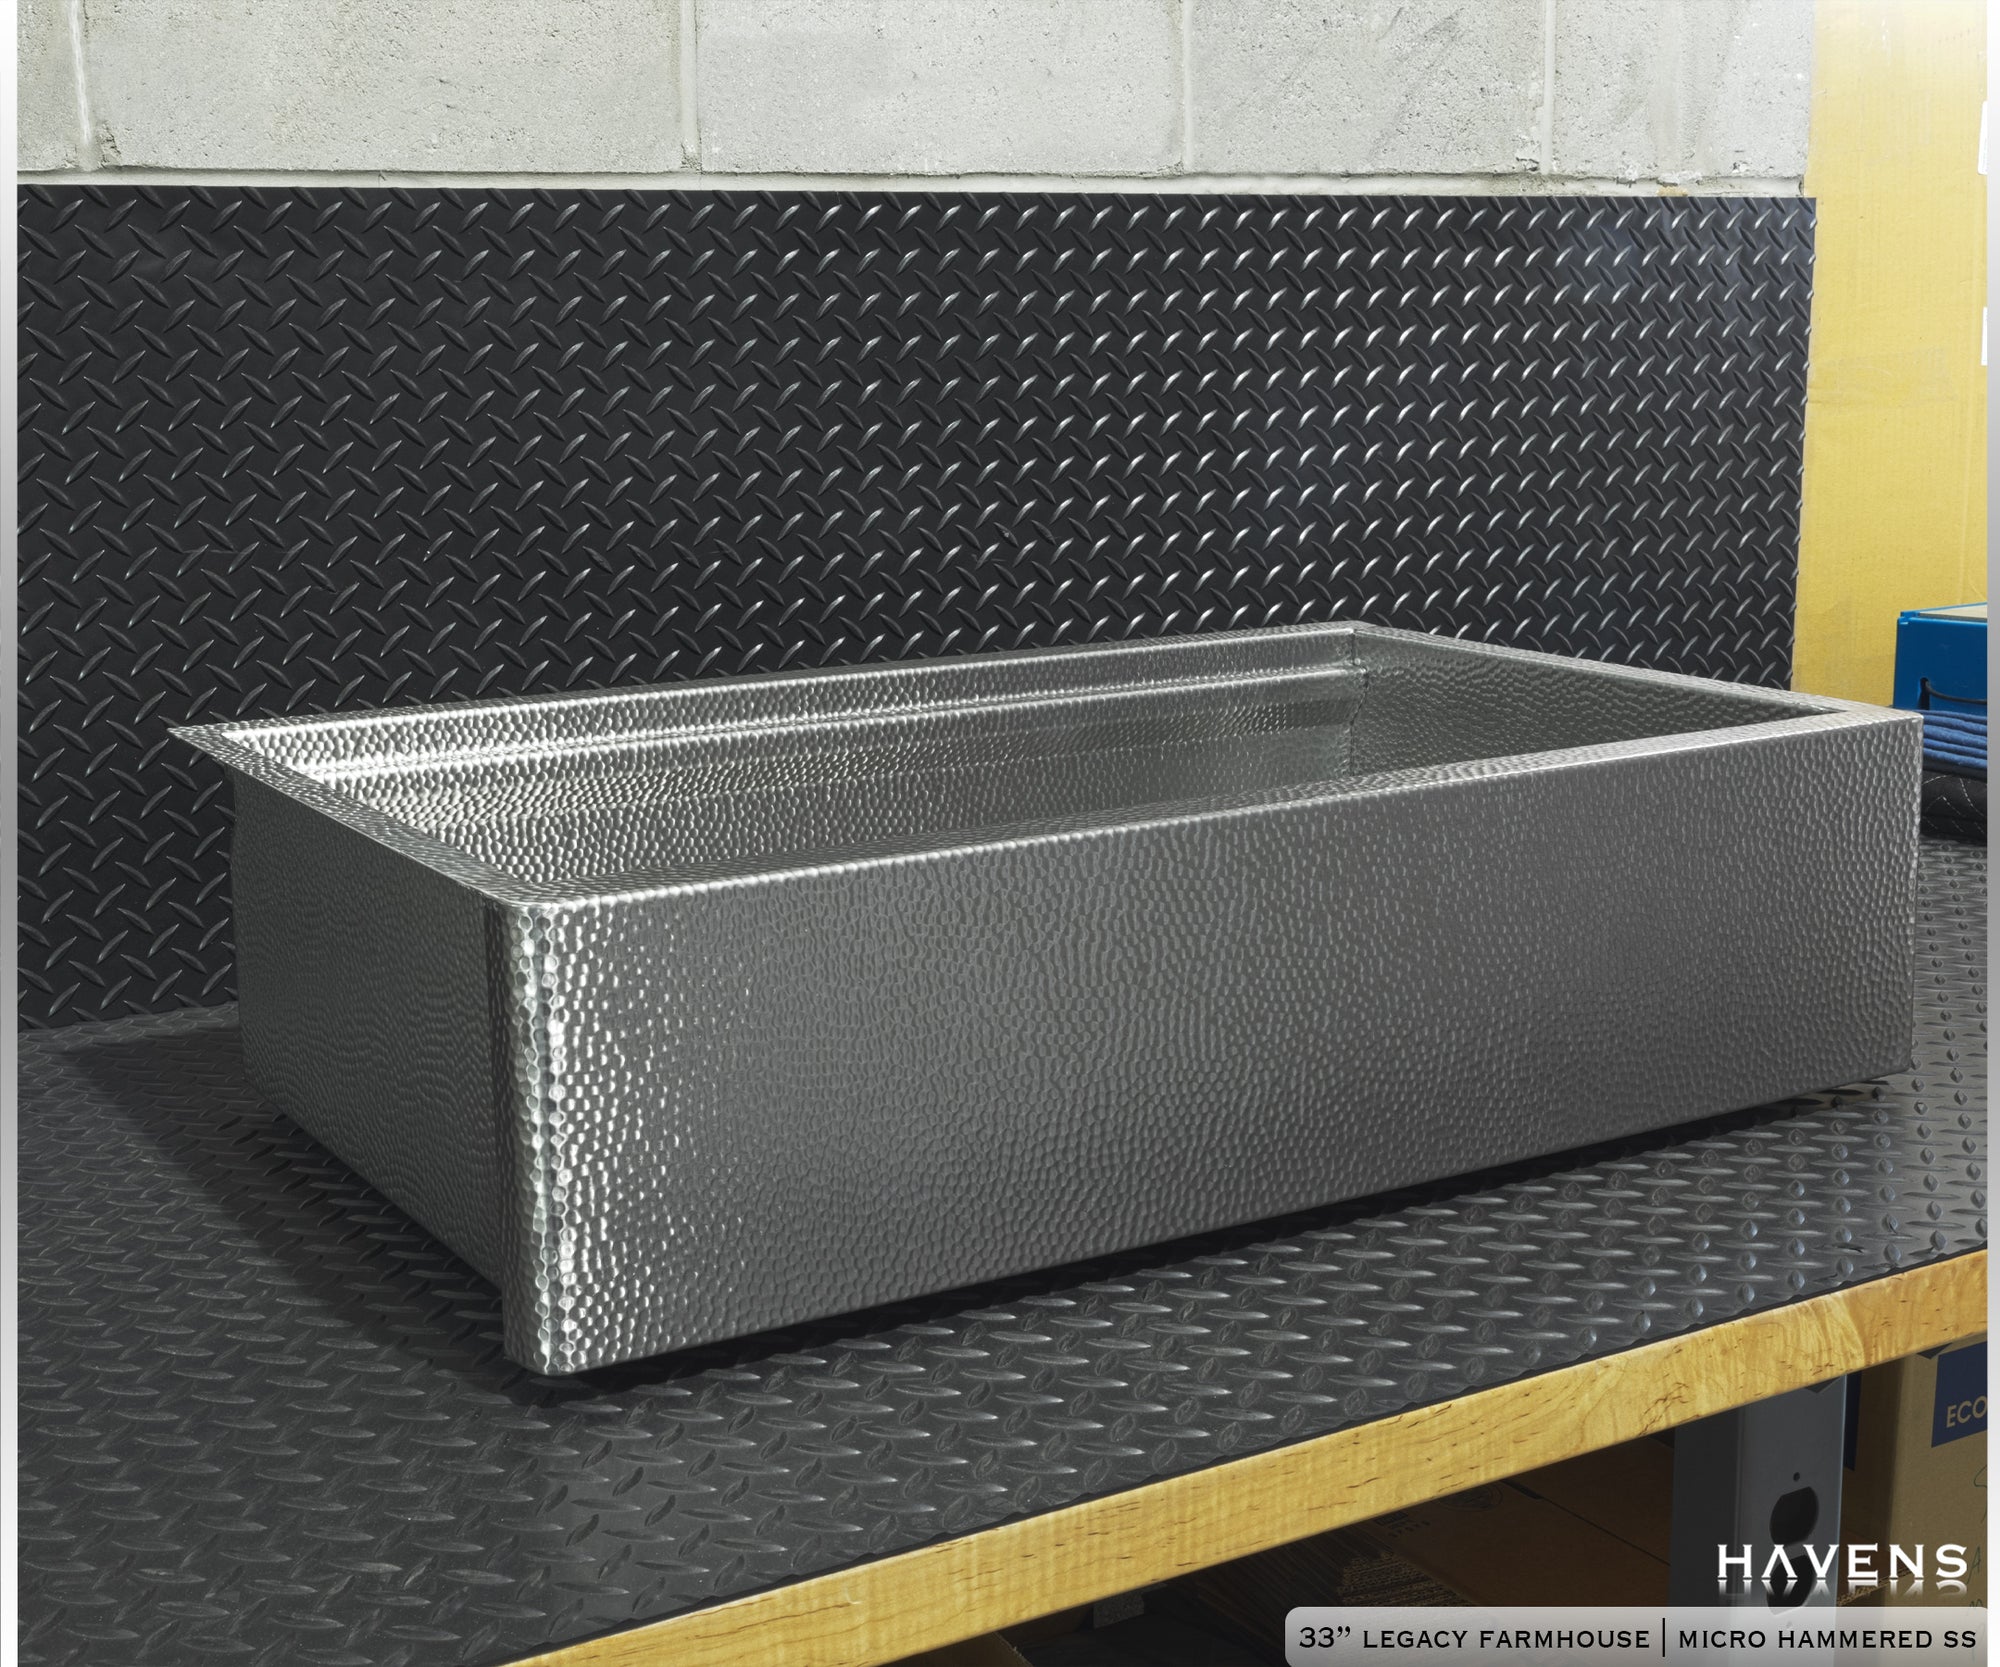 Legacy Farmhouse Sink - Micro Hammered Stainless